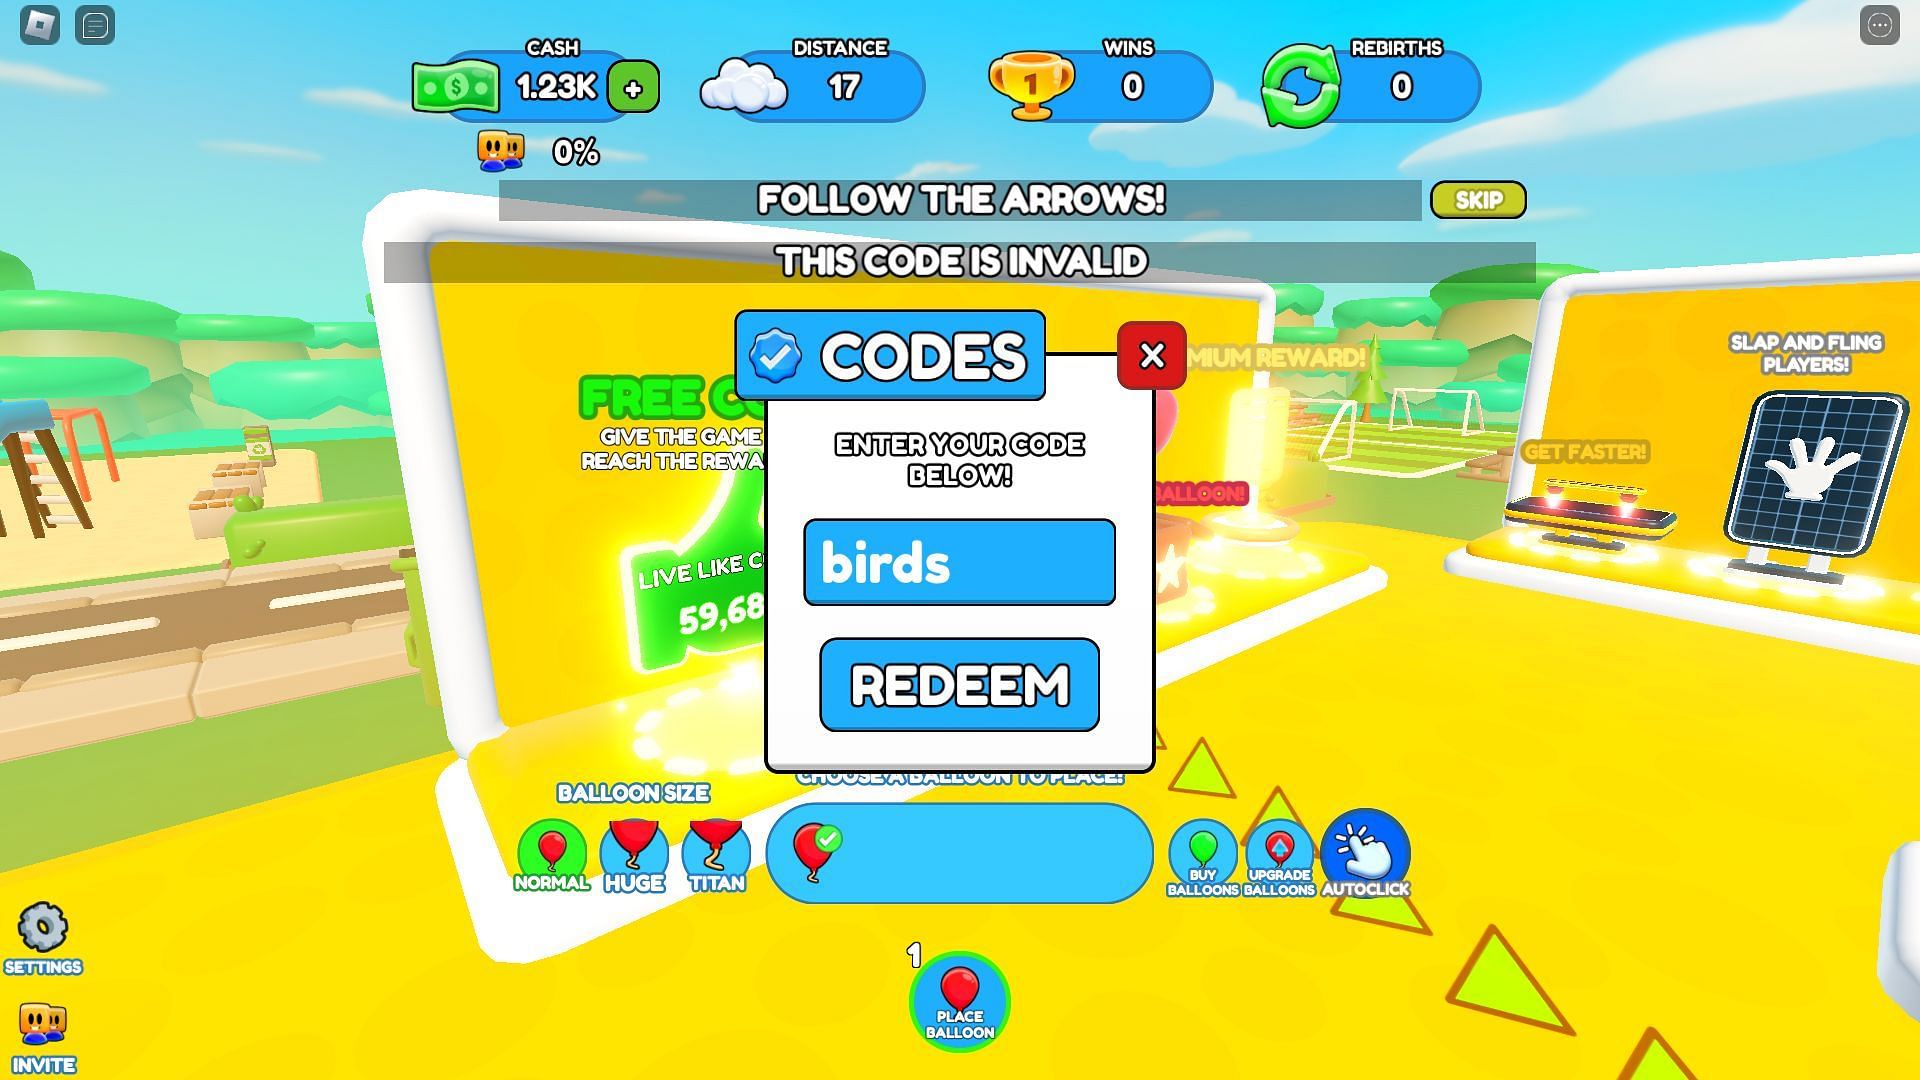 Troubleshooting codes for Balloon Simulator (Image via Roblox)